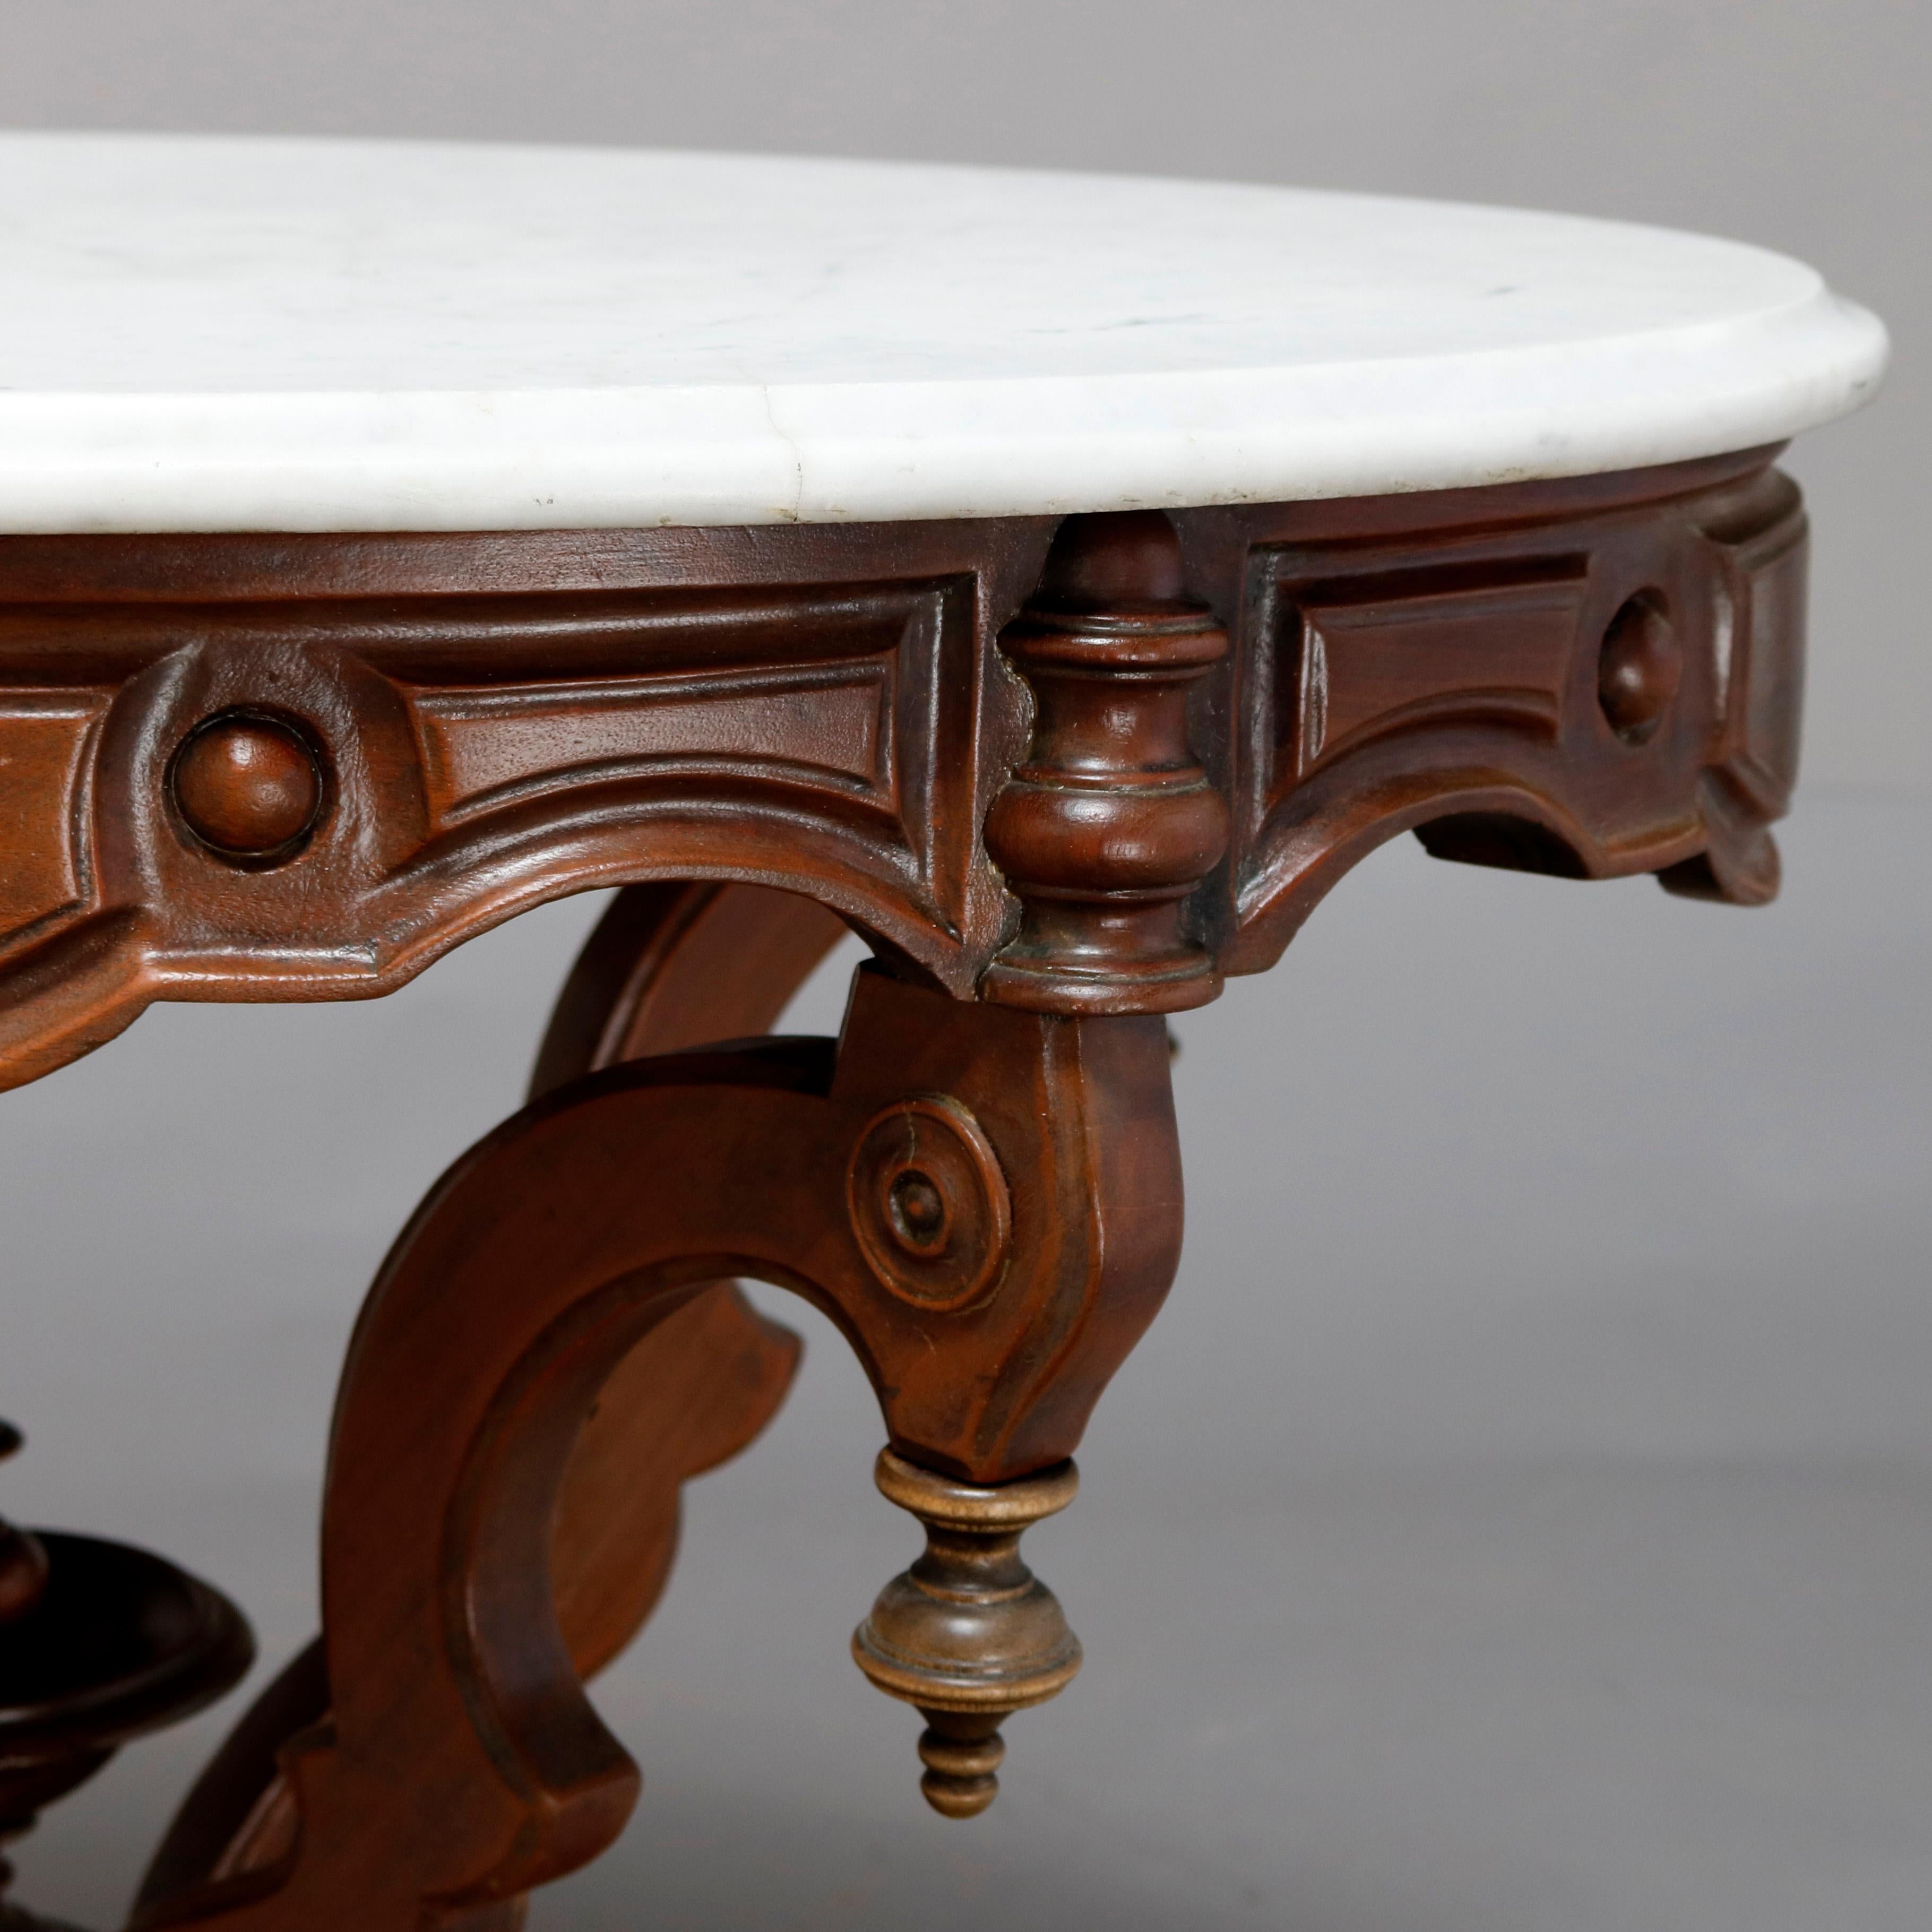 An antique Victorian Eastlake side table offers a beveled oval marble top surmounting carved walnut frame having paneled skirt raised on s-scroll legs with drop finials and central urn form finial, circa 1880

Measures: 28.5